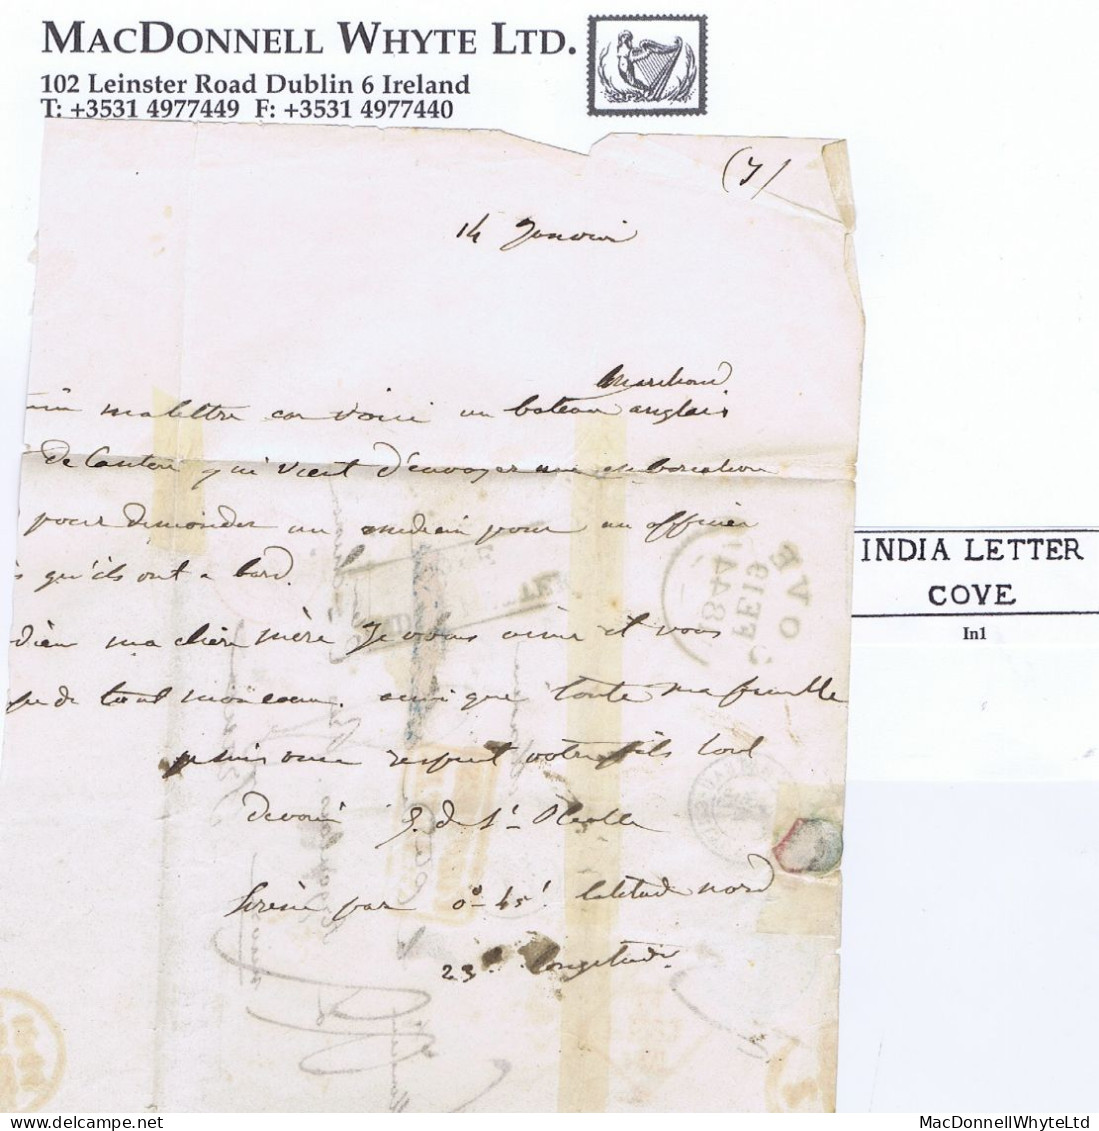 Ireland Maritime Cork 1844 Cover To France With Boxed INDIA LETTER/COVE And COVE FE 19 1844 Cds - Vorphilatelie